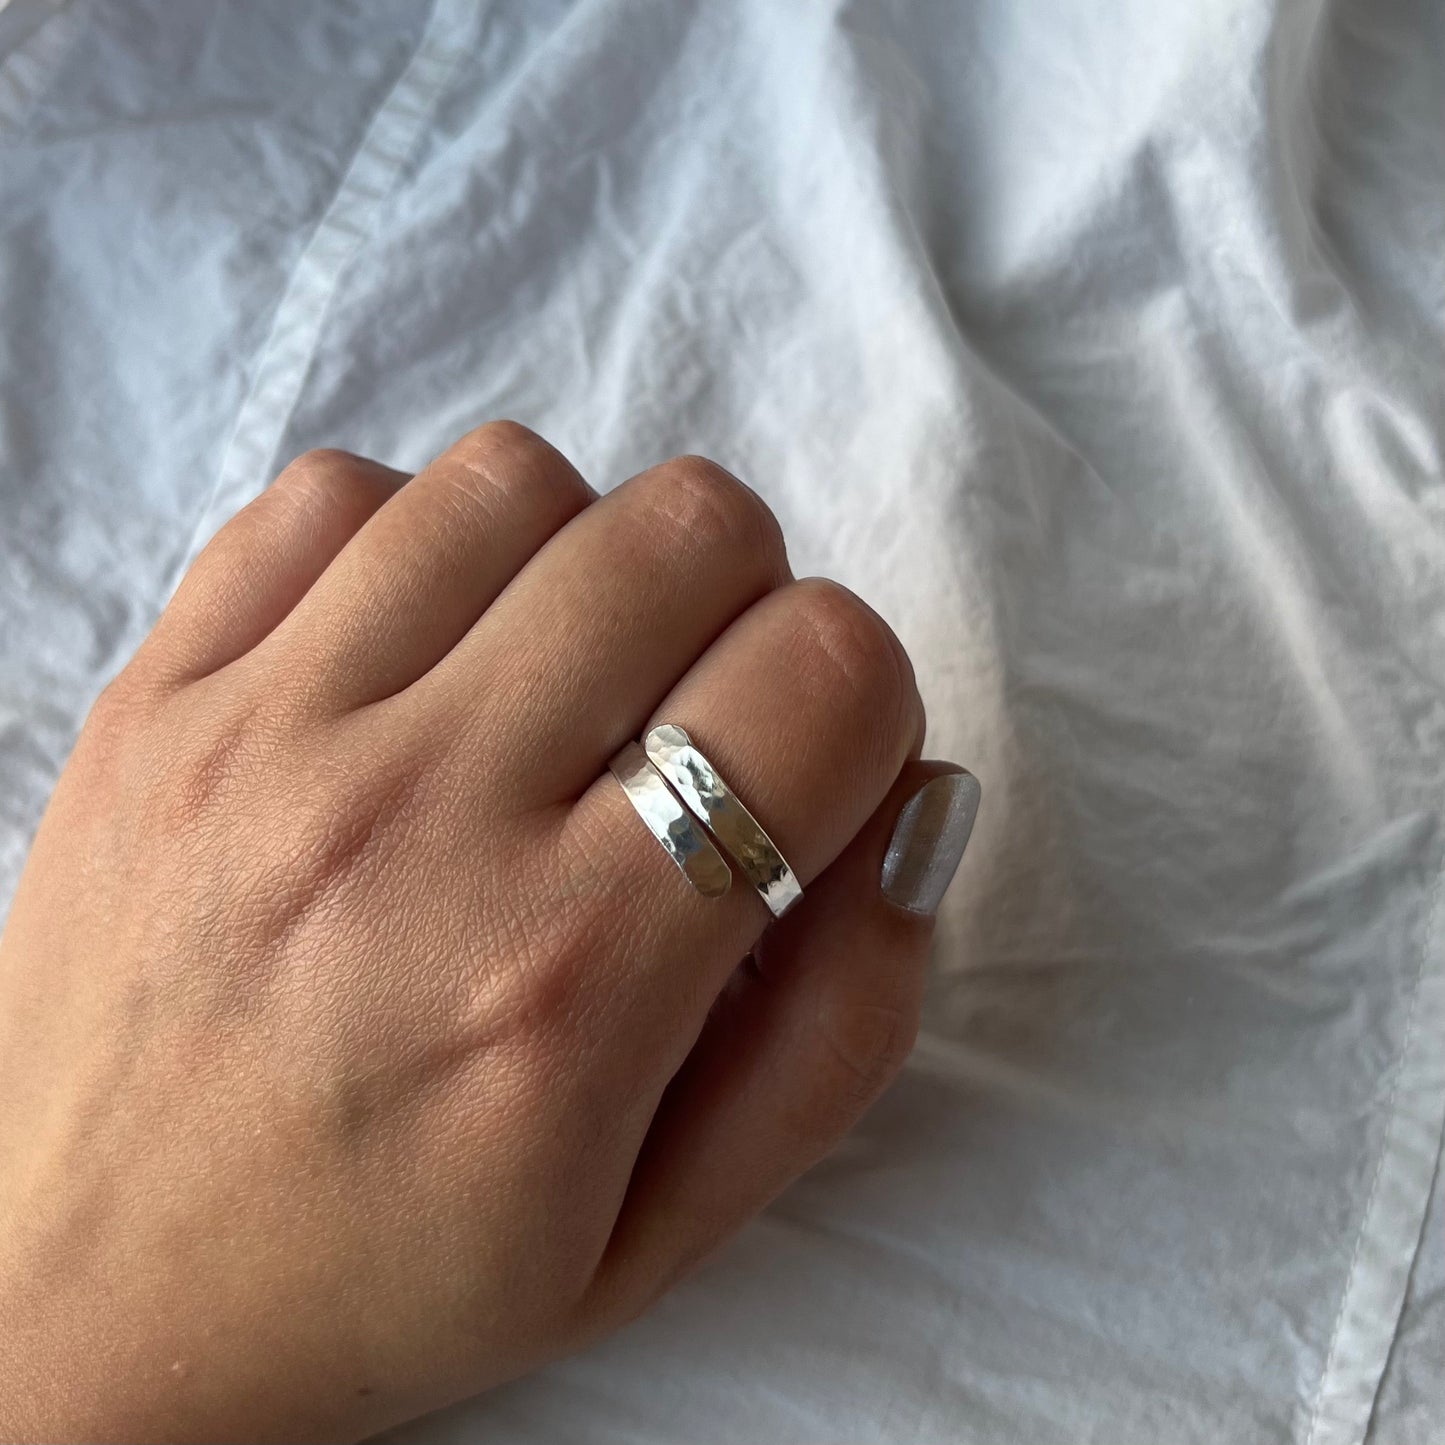 A sterling silver adjustable ring